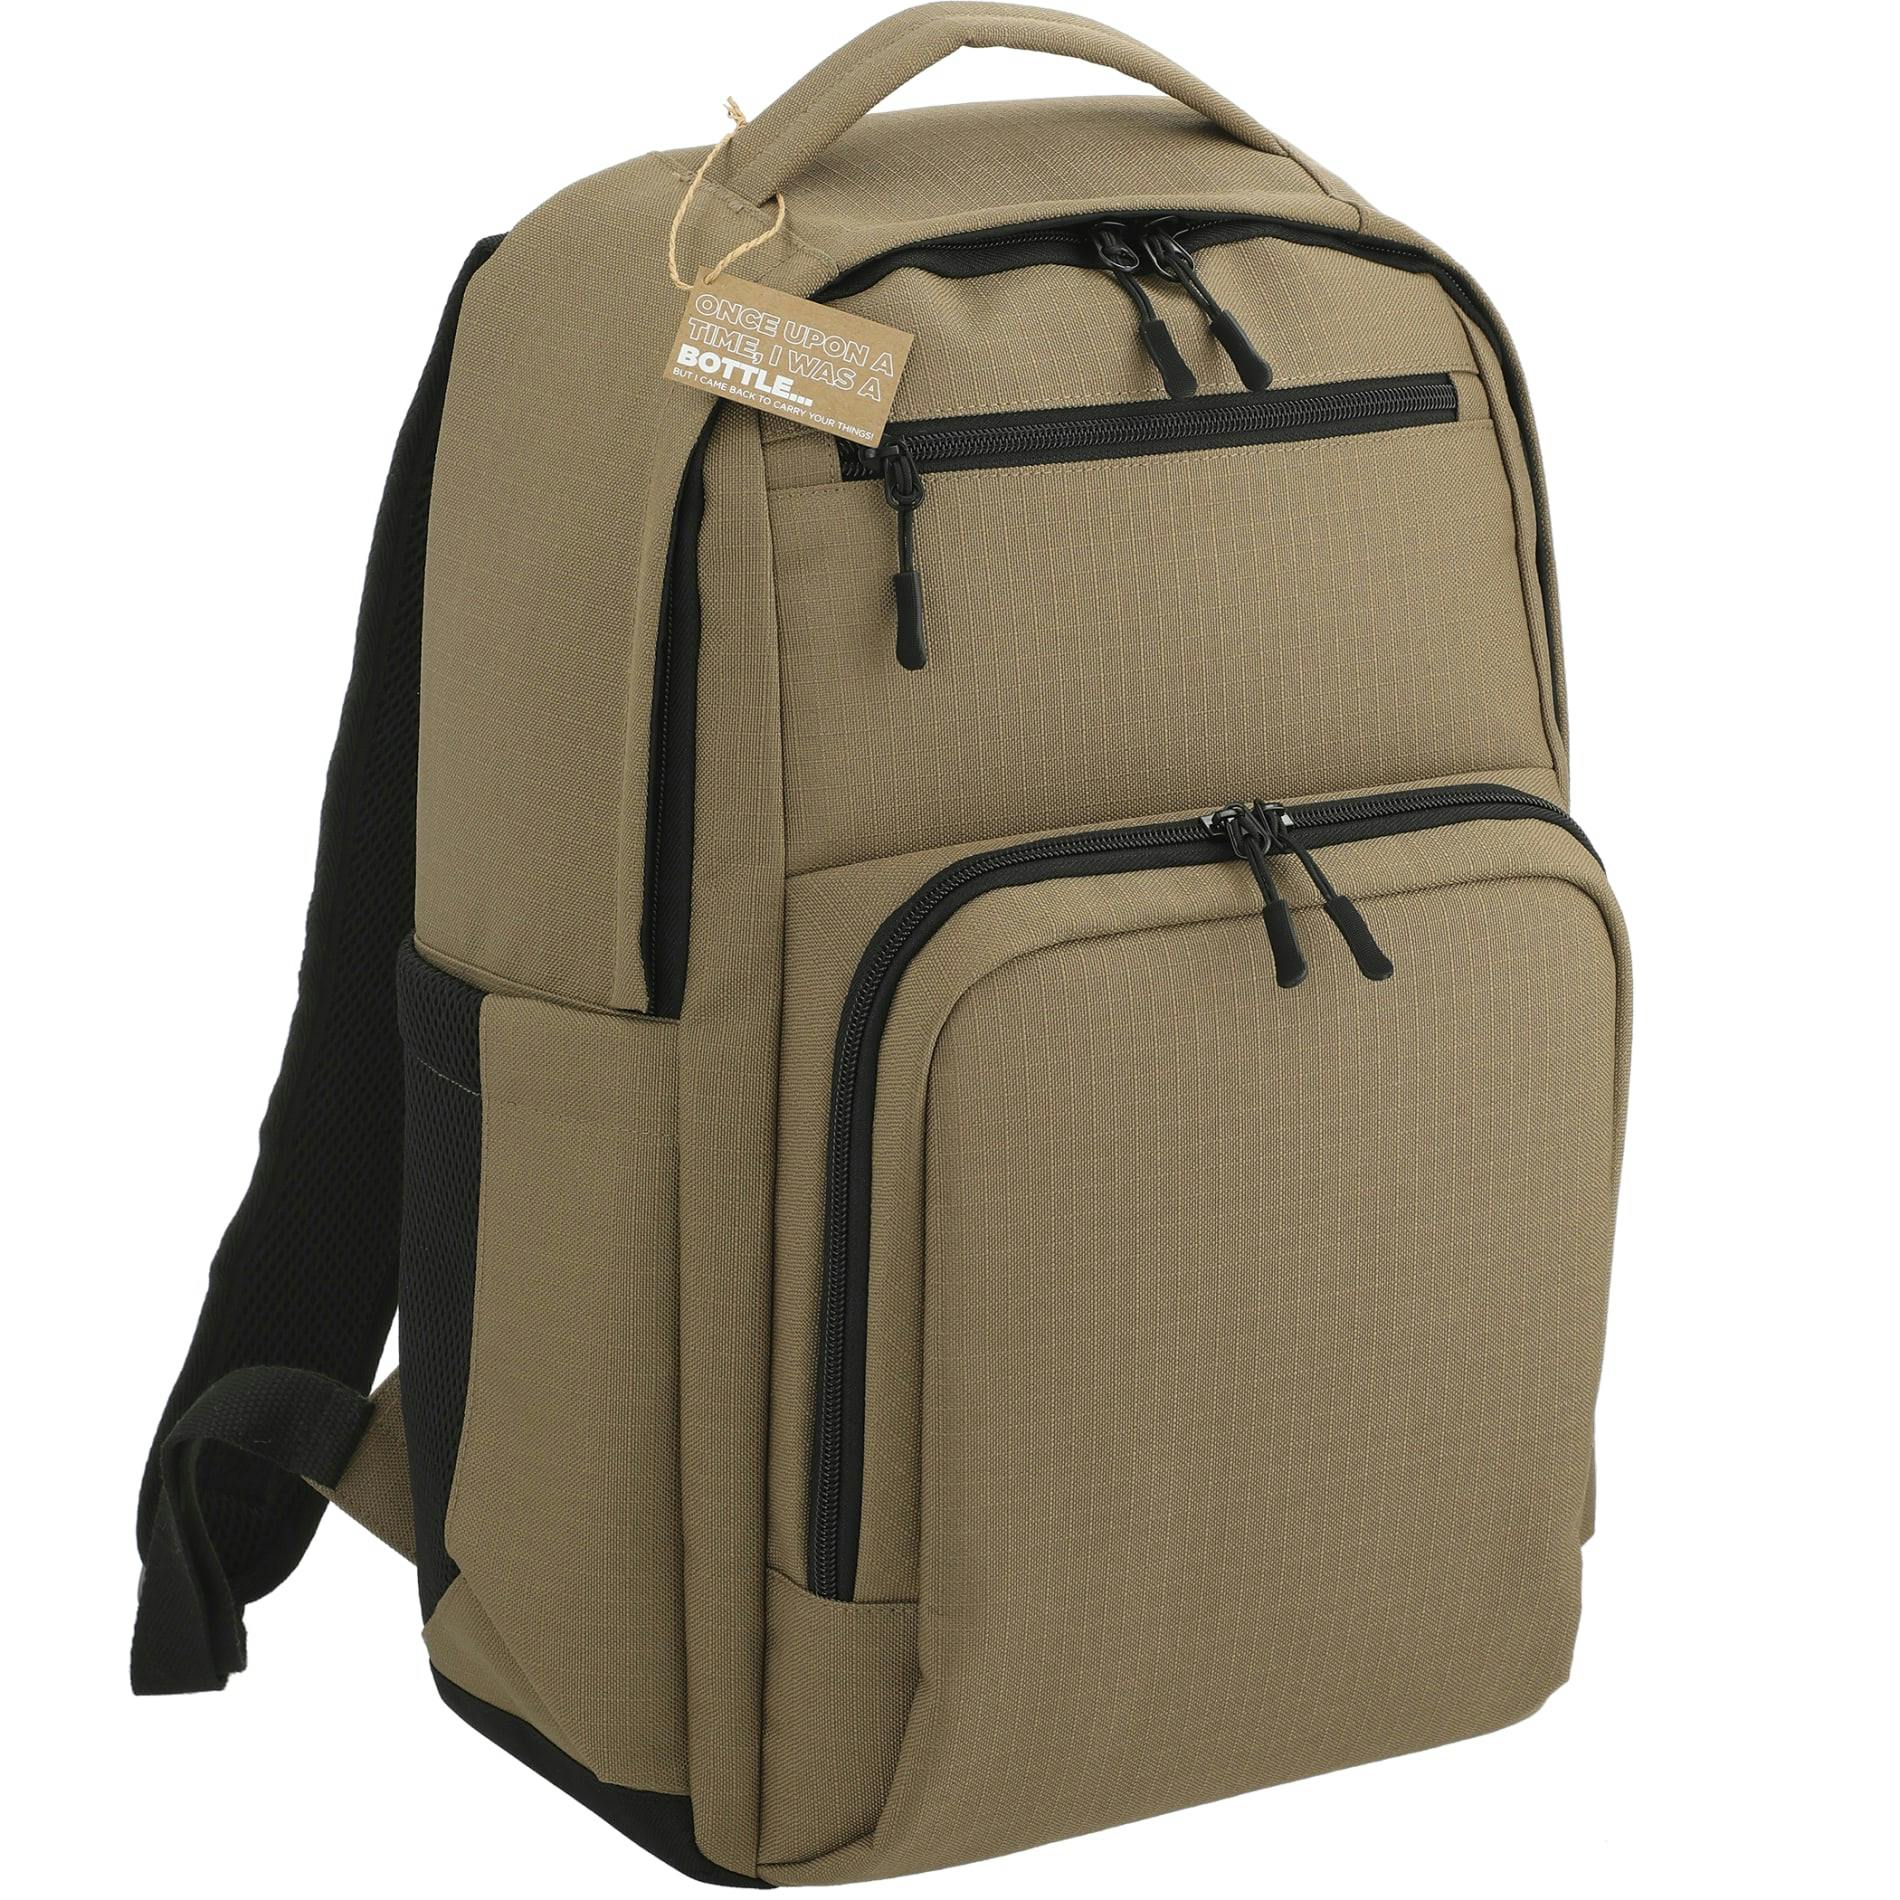 NBN Recycled Utility Insulated Backpack - additional Image 2